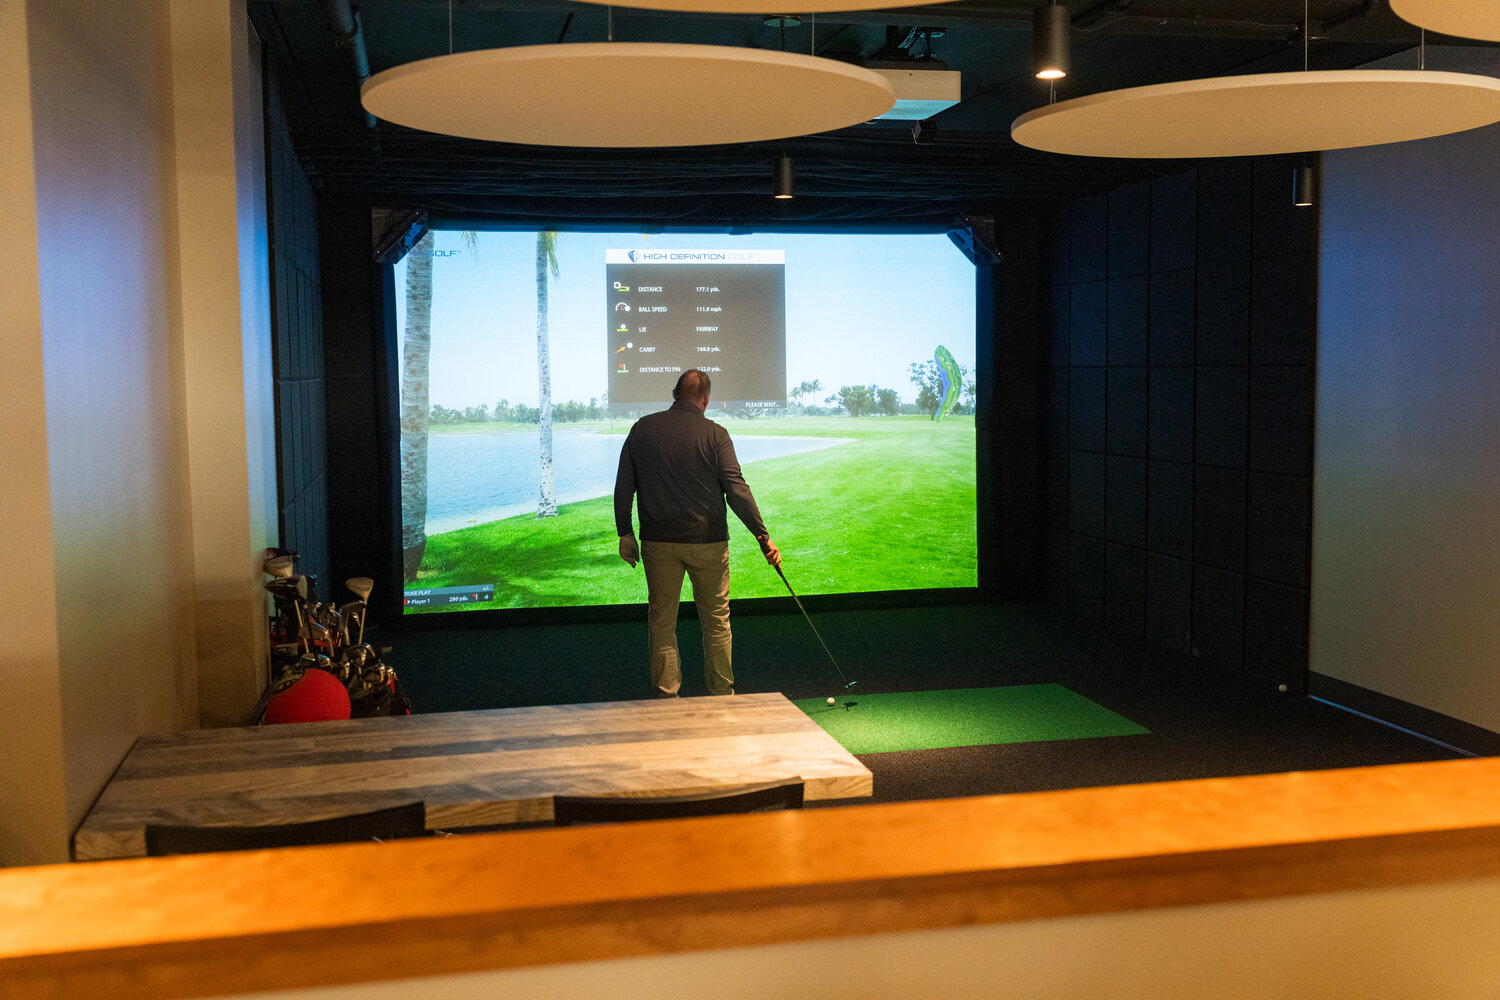 The simulators are state of the art and have plenty of room for groups to enjoy a round of golf and a few rounds of beverages.